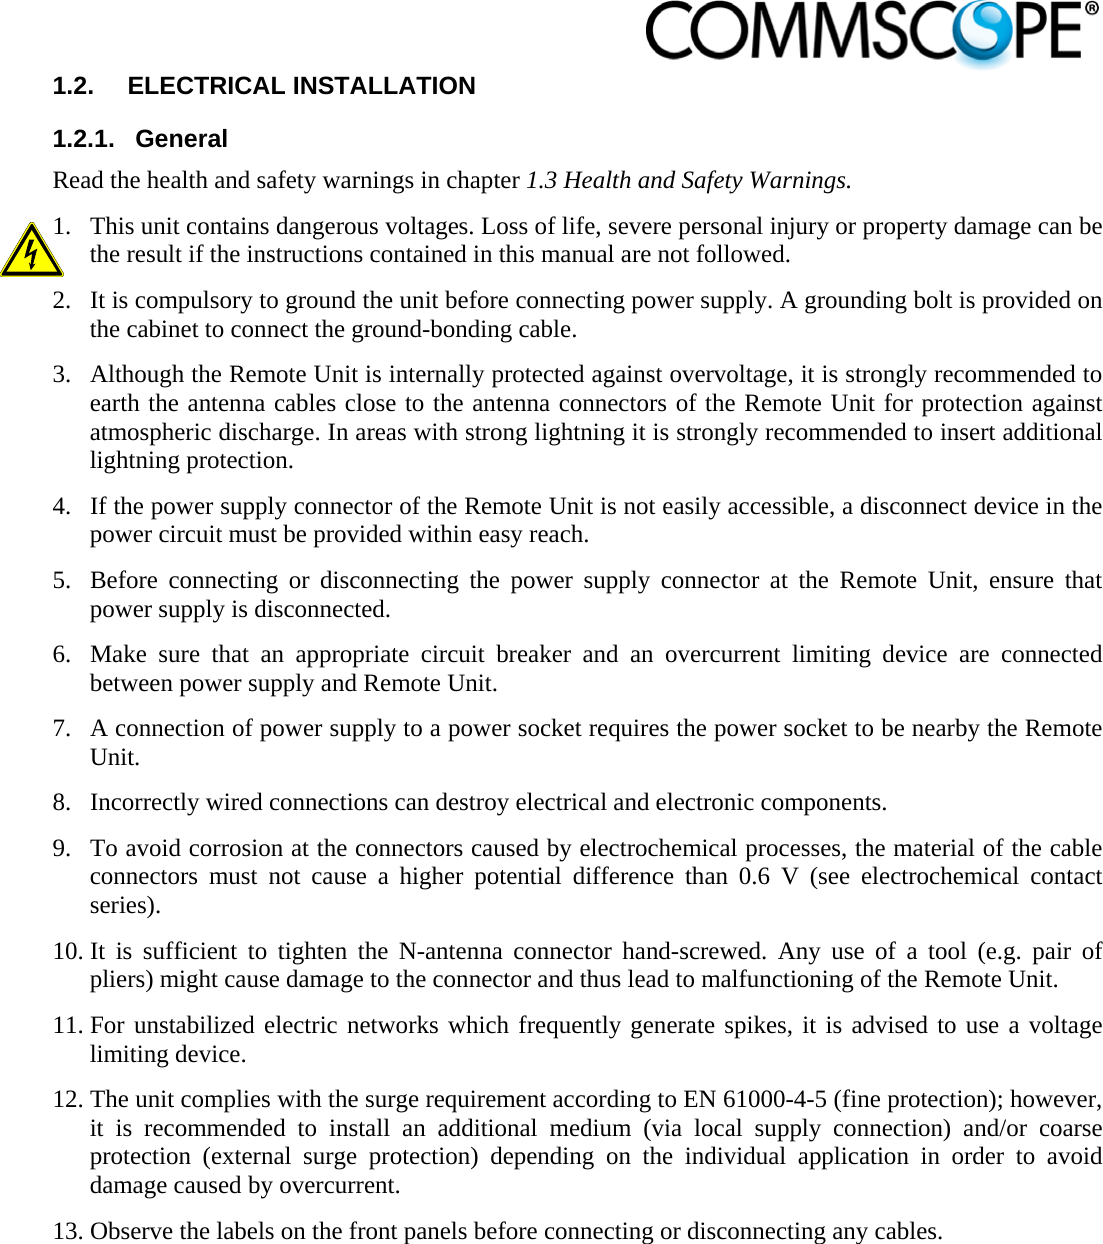                            1.2.  ELECTRICAL INSTALLATION 1.2.1.  General Read the health and safety warnings in chapter 1.3 Health and Safety Warnings. 1. This unit contains dangerous voltages. Loss of life, severe personal injury or property damage can be the result if the instructions contained in this manual are not followed. 2. It is compulsory to ground the unit before connecting power supply. A grounding bolt is provided on the cabinet to connect the ground-bonding cable. 3. Although the Remote Unit is internally protected against overvoltage, it is strongly recommended to earth the antenna cables close to the antenna connectors of the Remote Unit for protection against atmospheric discharge. In areas with strong lightning it is strongly recommended to insert additional lightning protection. 4. If the power supply connector of the Remote Unit is not easily accessible, a disconnect device in the power circuit must be provided within easy reach. 5. Before connecting or disconnecting the power supply connector at the Remote Unit, ensure that power supply is disconnected. 6. Make sure that an appropriate circuit breaker and an overcurrent limiting device are connected between power supply and Remote Unit. 7. A connection of power supply to a power socket requires the power socket to be nearby the Remote Unit. 8. Incorrectly wired connections can destroy electrical and electronic components. 9. To avoid corrosion at the connectors caused by electrochemical processes, the material of the cable connectors must not cause a higher potential difference than 0.6 V (see electrochemical contact series). 10. It is sufficient to tighten the N-antenna connector hand-screwed. Any use of a tool (e.g. pair of pliers) might cause damage to the connector and thus lead to malfunctioning of the Remote Unit. 11. For unstabilized electric networks which frequently generate spikes, it is advised to use a voltage limiting device.  12. The unit complies with the surge requirement according to EN 61000-4-5 (fine protection); however, it is recommended to install an additional medium (via local supply connection) and/or coarse protection (external surge protection) depending on the individual application in order to avoid damage caused by overcurrent. 13. Observe the labels on the front panels before connecting or disconnecting any cables. 